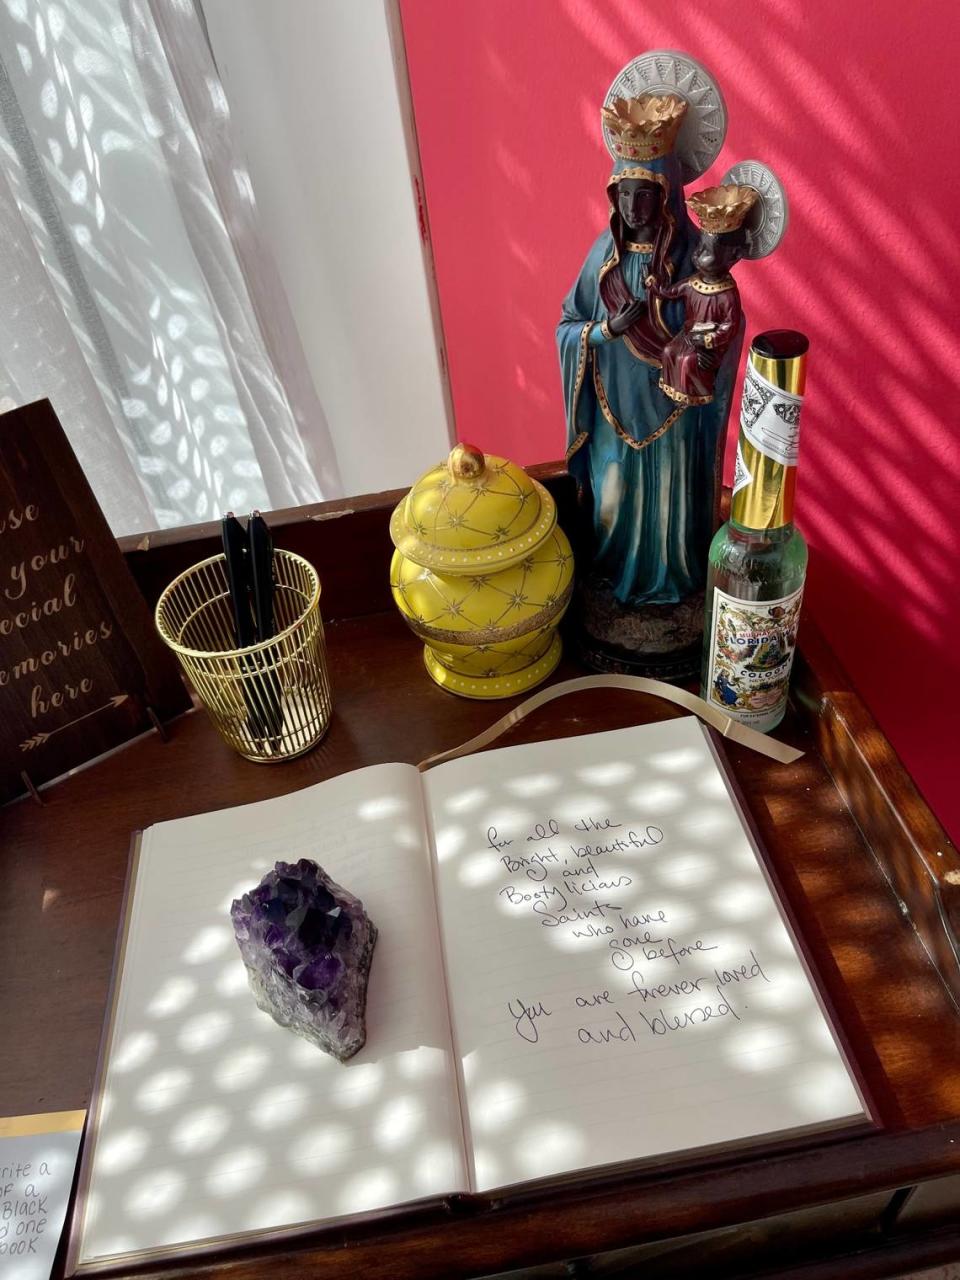 A remembrance book lays open in “The Repast” section of “Give Them Their Flowers,” an exhibition on Miami’s Black LGBTQ history in Little Haiti. Visitors are invited to leave messages honoring deceased Black queer loved ones.